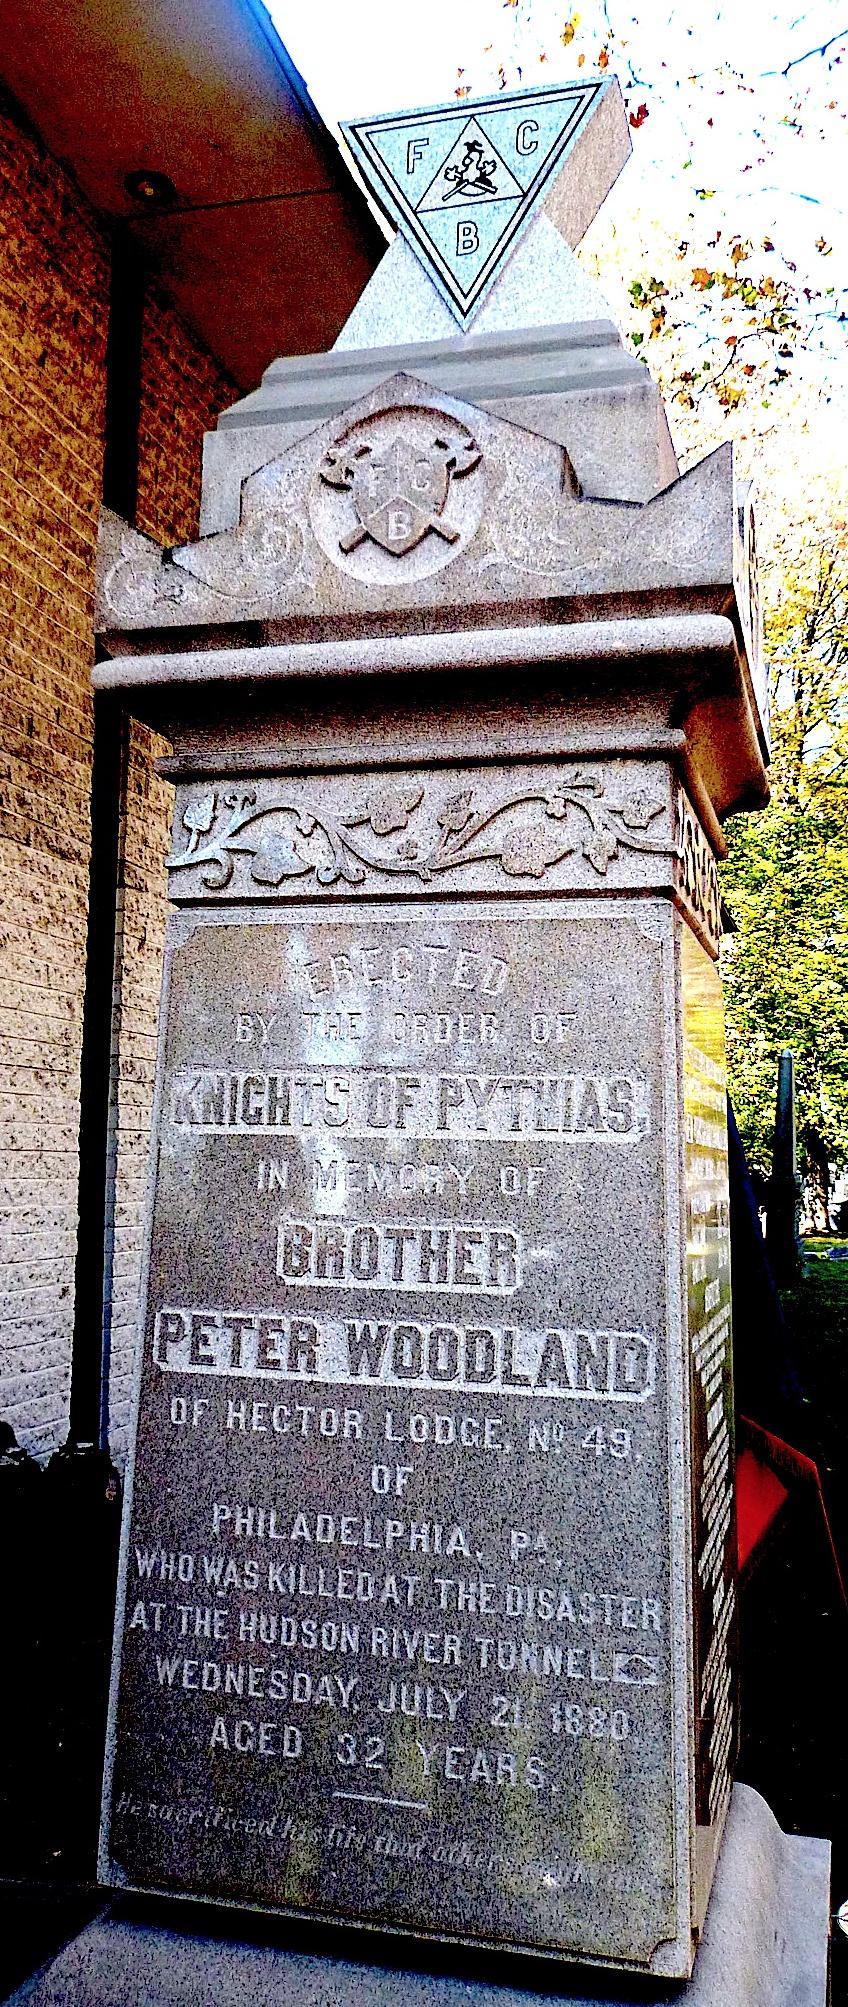 Pythian News Knights of Pythias Honor Hero Who Saved Lives Fraternal & Charitable Order rededicate Monument to Peter Woodland The Order of Knights of Pythias, honored a heroic member who died